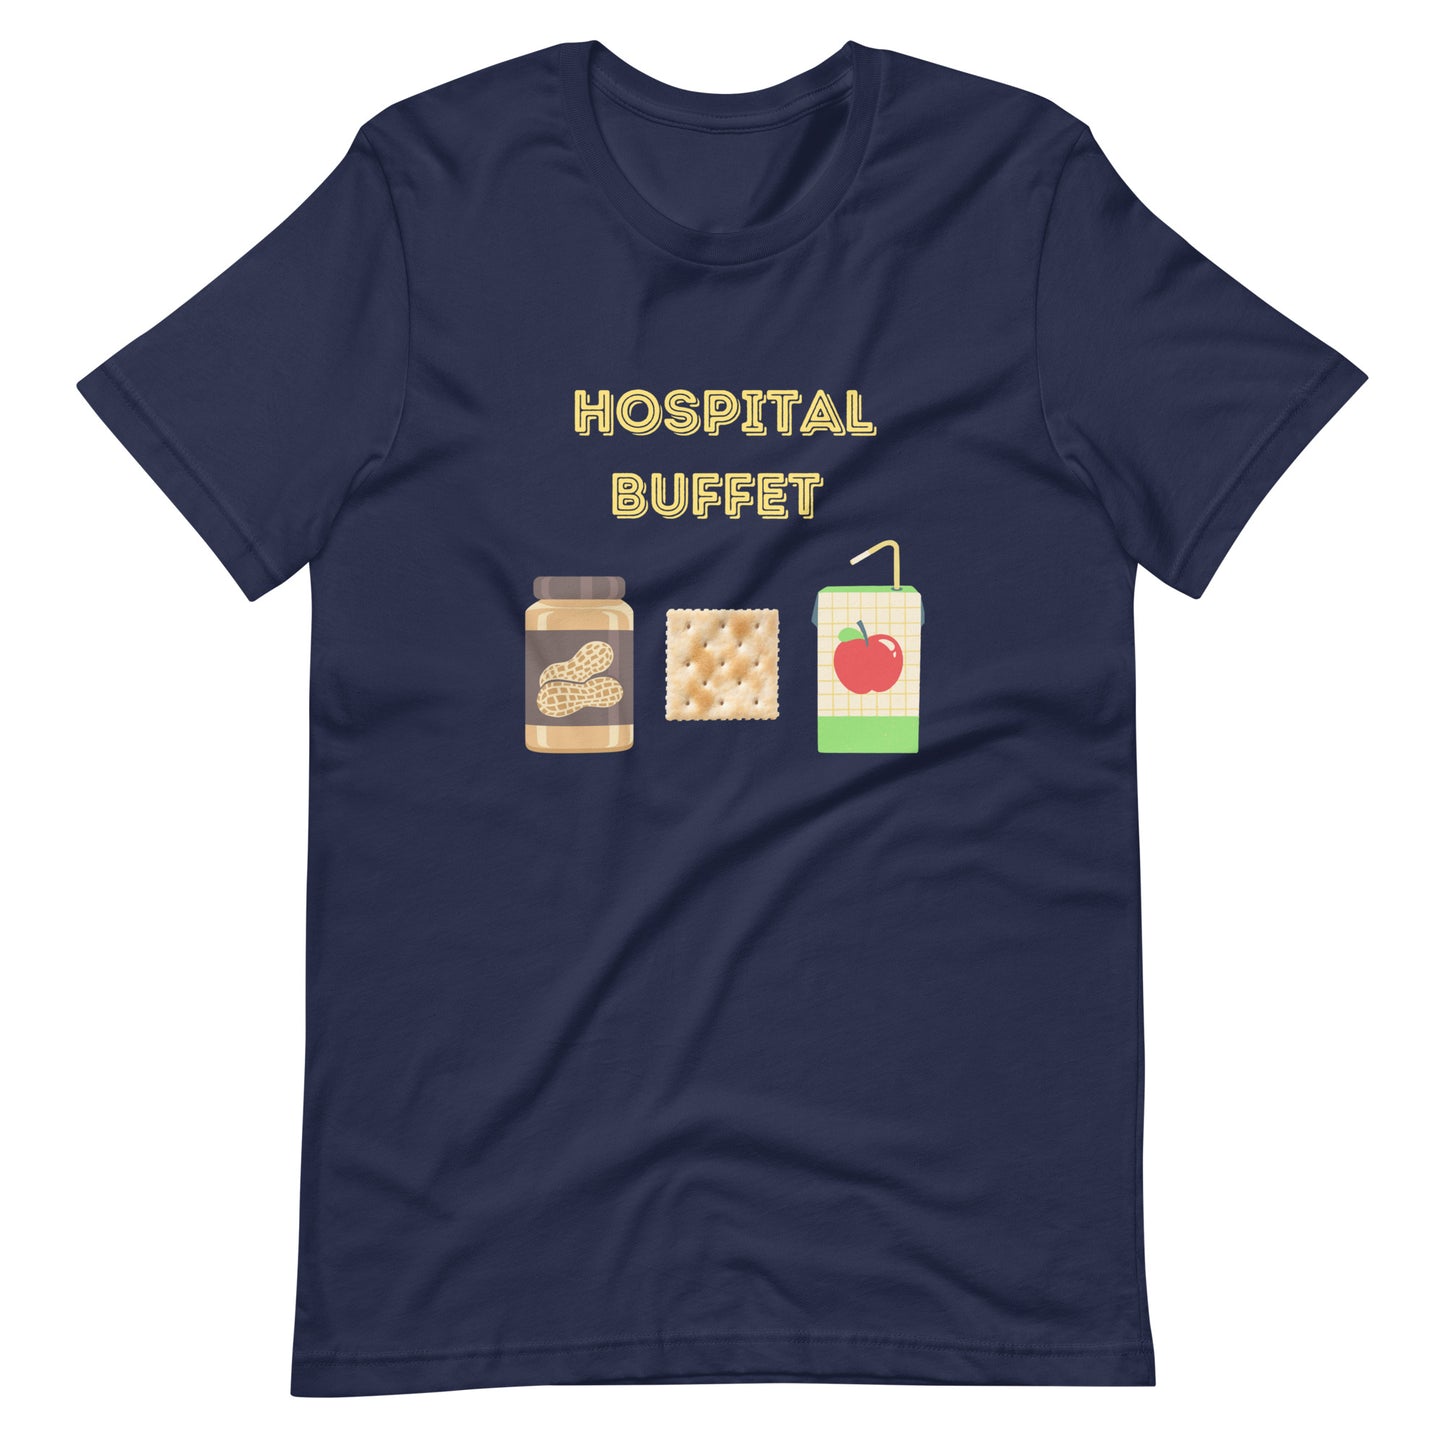 Graphic Tee, Hospital Buffet, Funny Doctor Shirt, Medical Student, Funny Nurse Shirt, Funny Resident Shirt, Doctor, Physician, Resident, Nurse, PA, NP, Medical Student